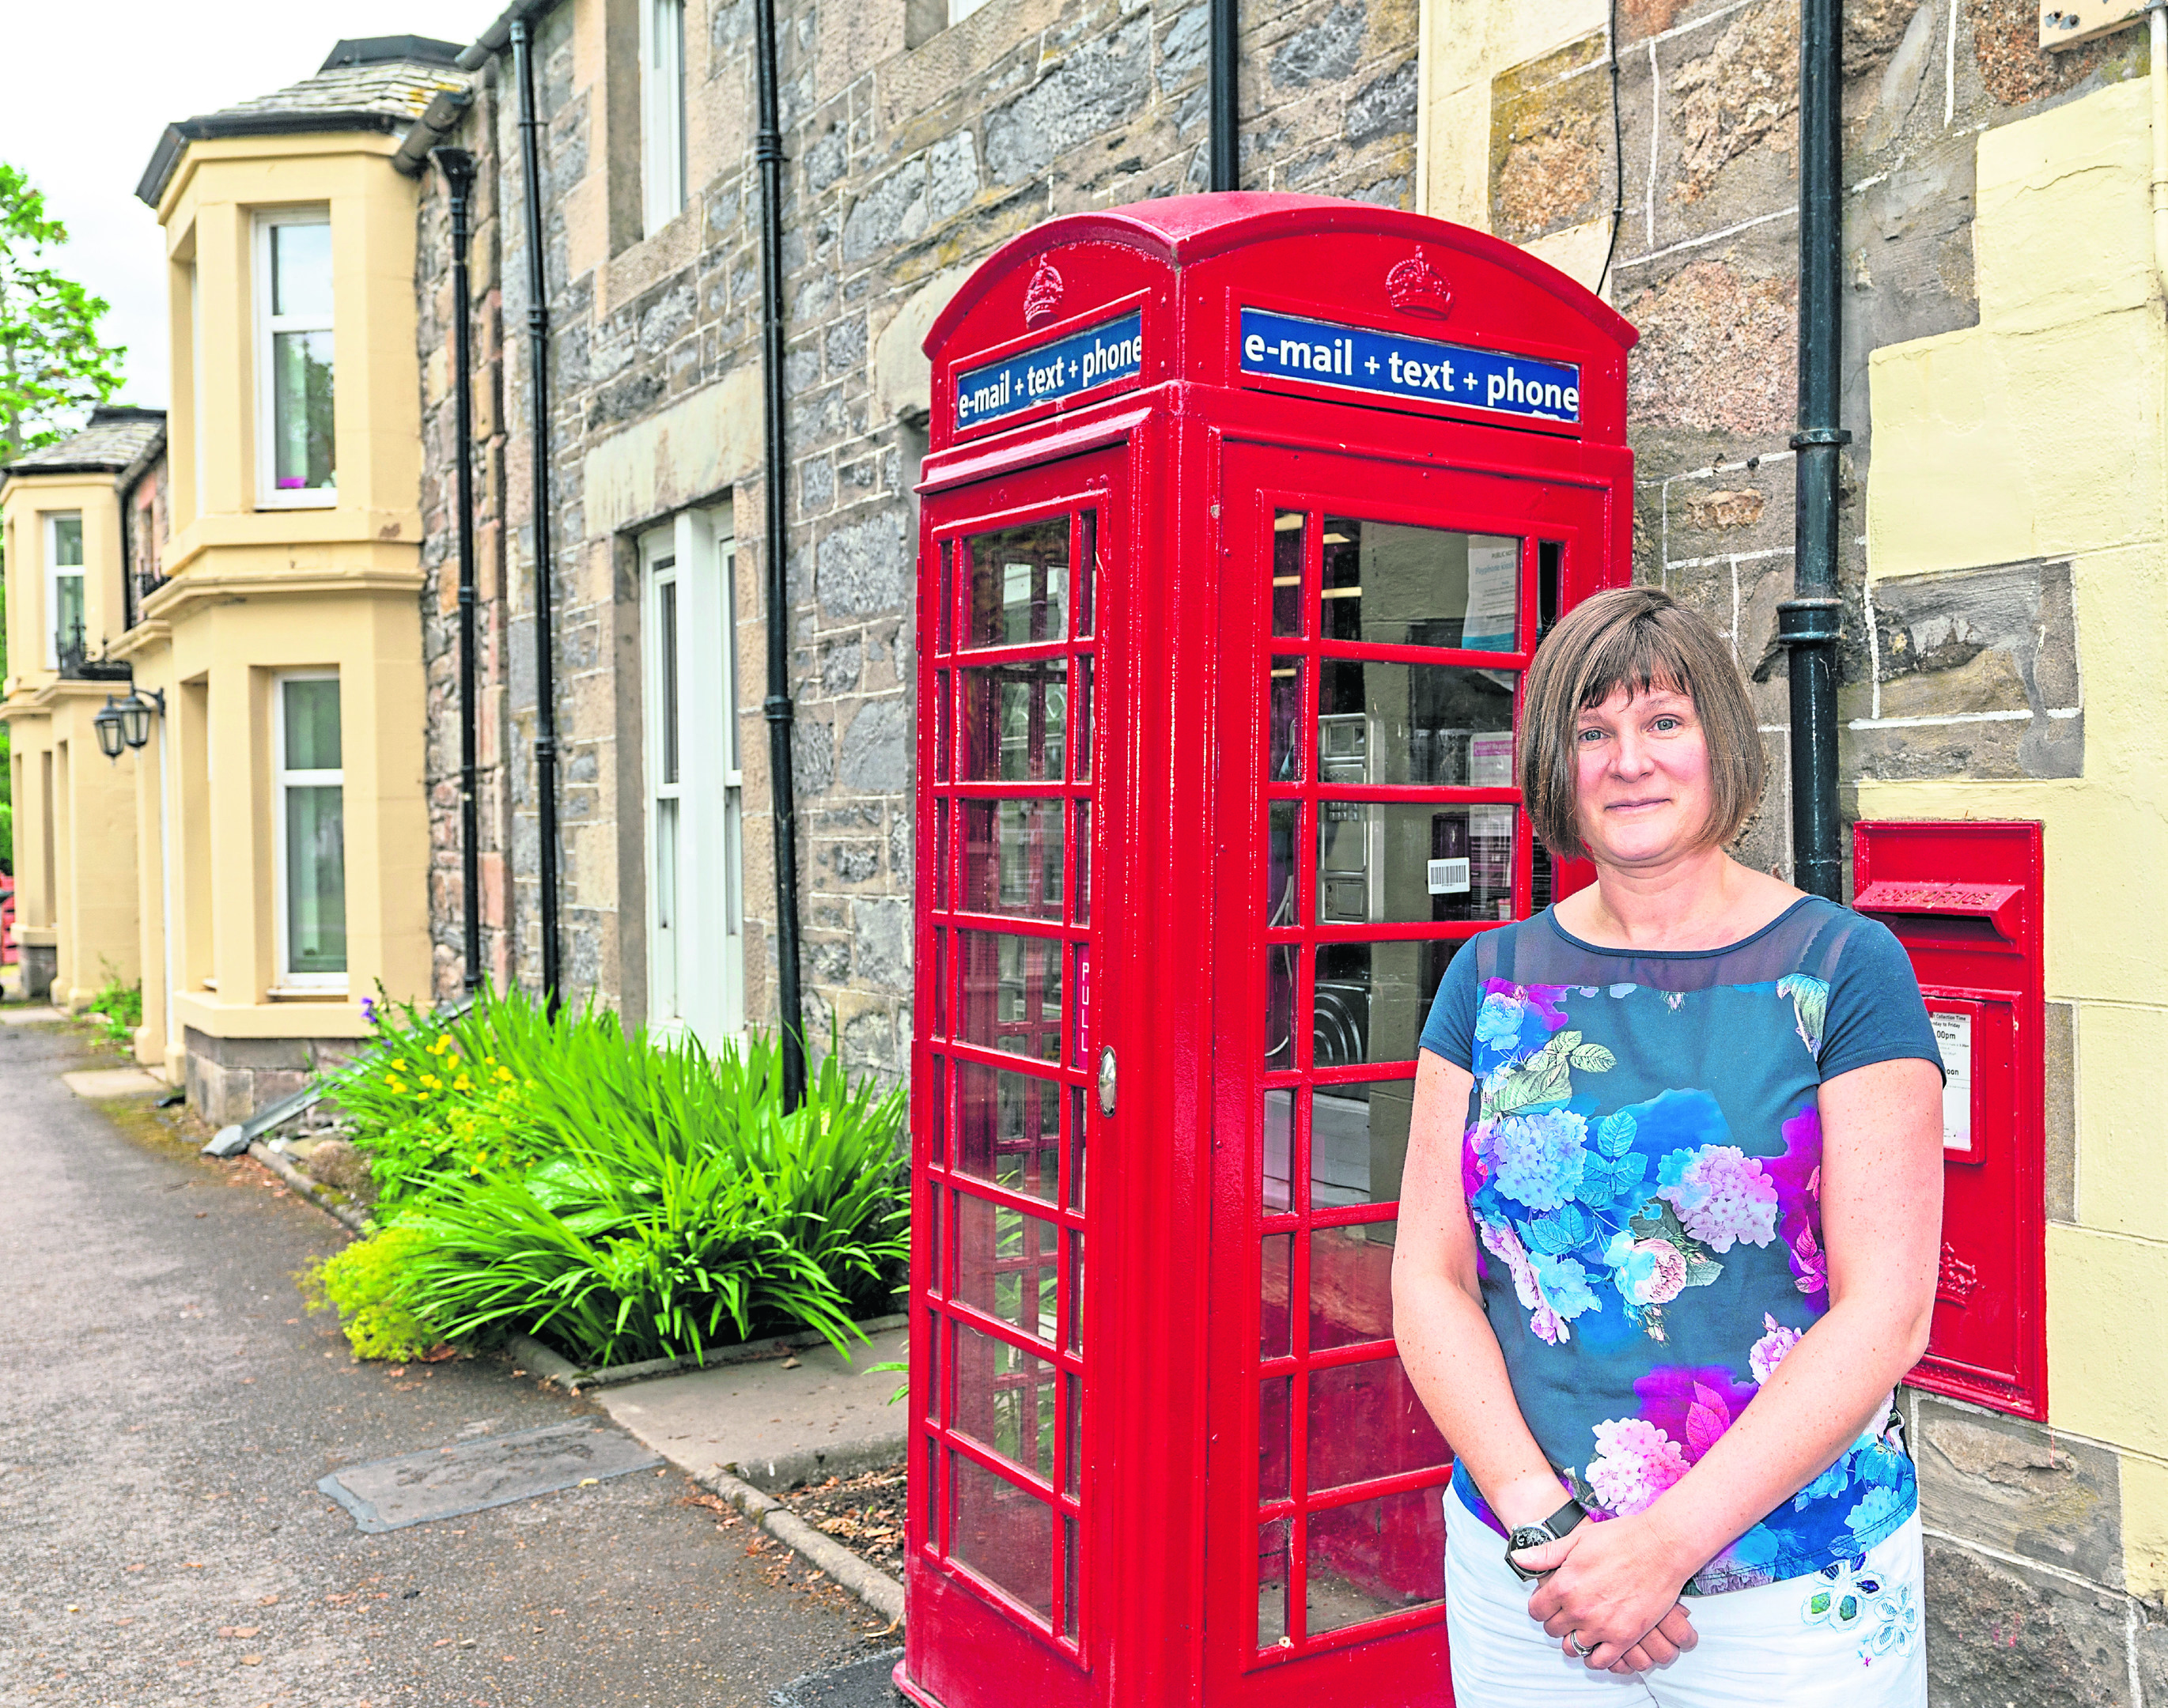 Caroline Breen in the Square at Tomintoul Village, Moray, Scotland. The telephone kiosk was to be removed by BT and is situated outside the village Post office.